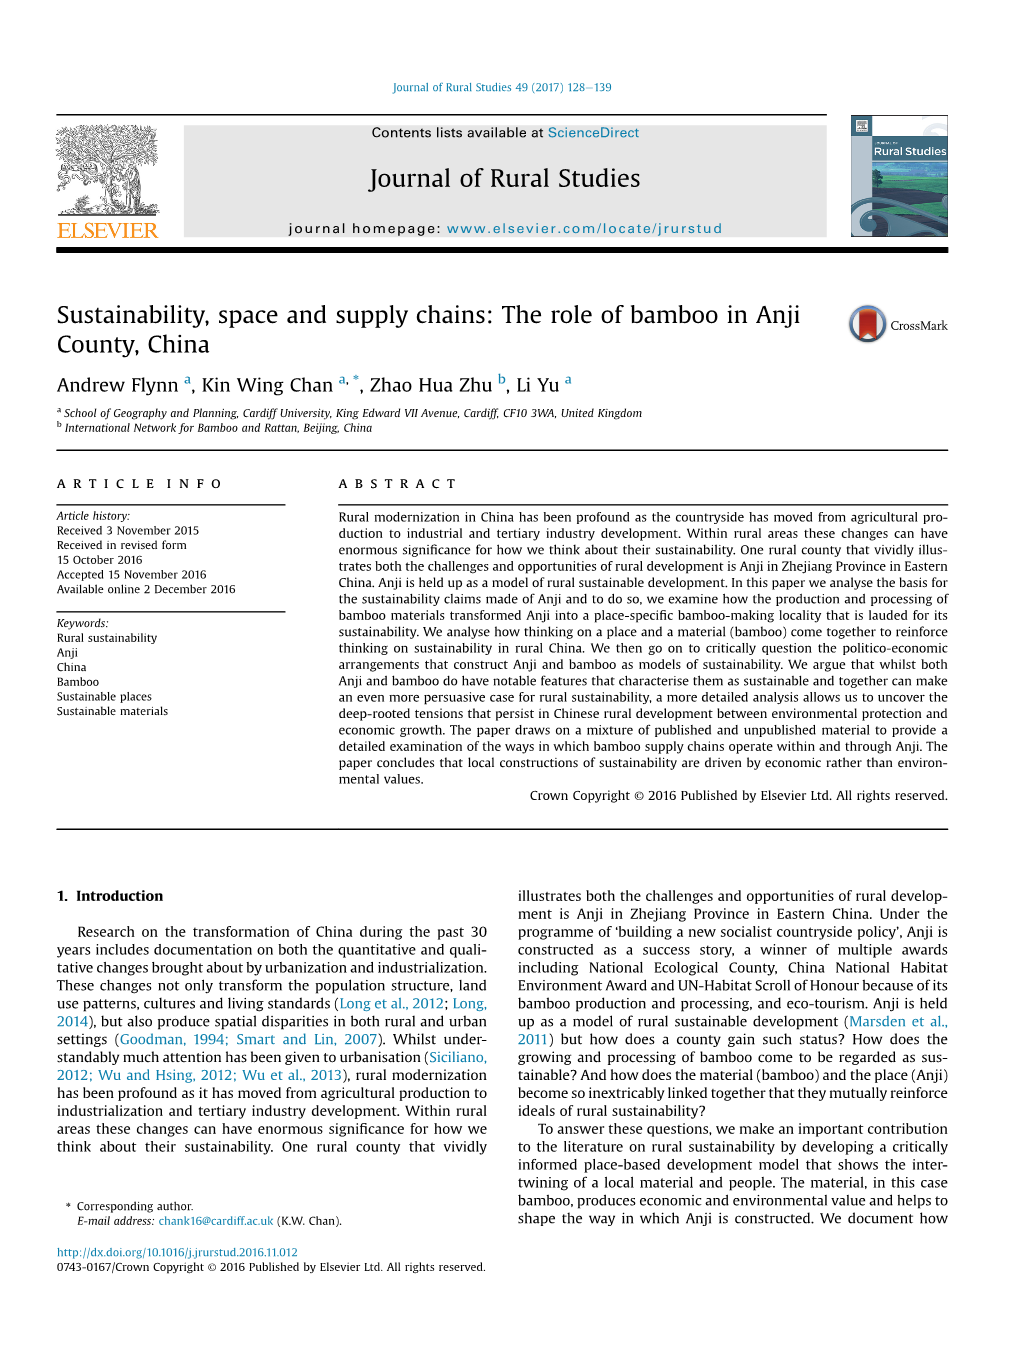 Sustainability, Space and Supply Chains: the Role of Bamboo in Anji County, China